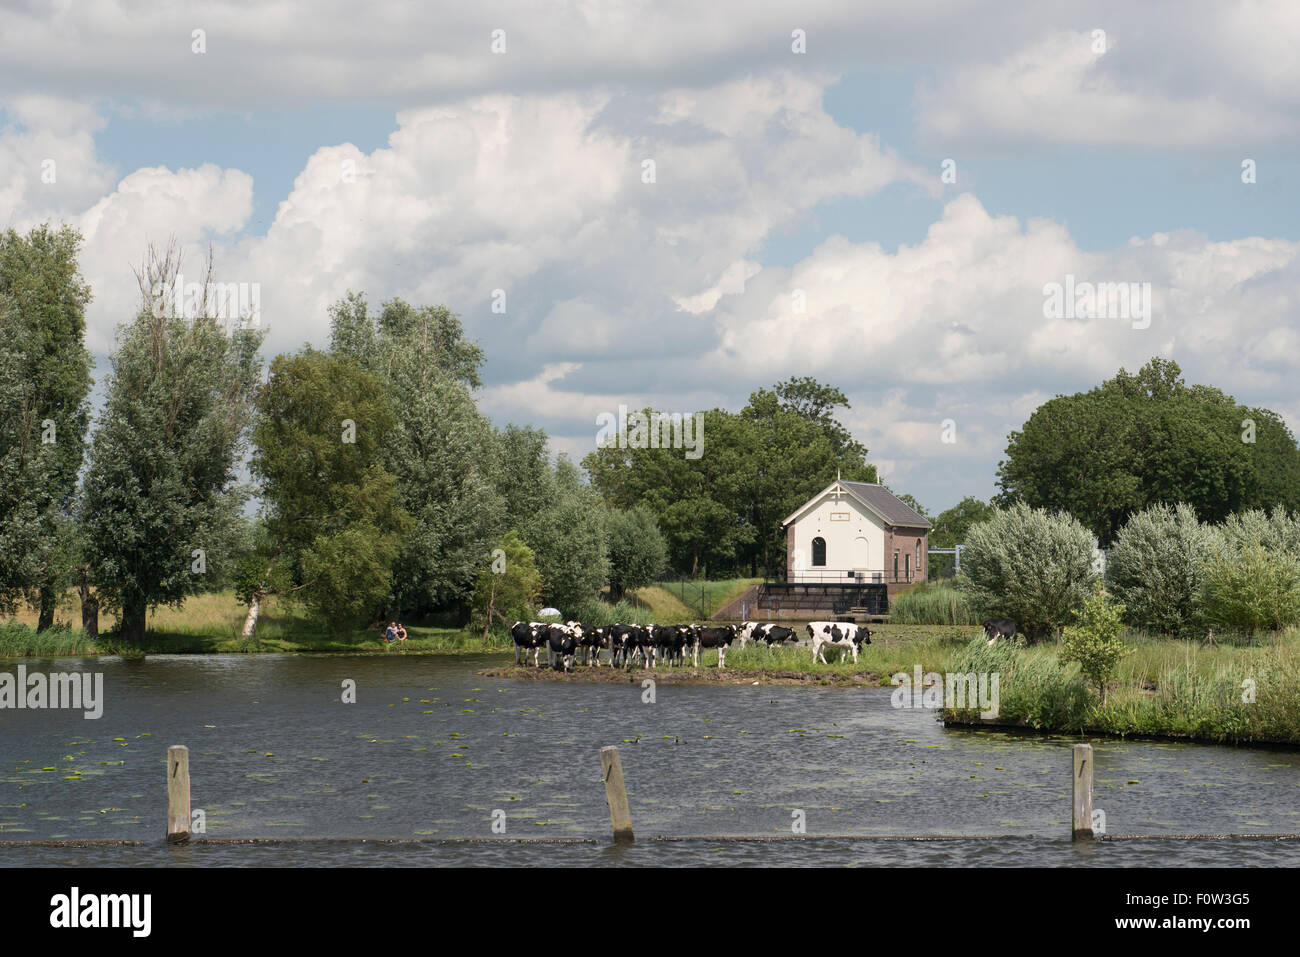 A couple watching milk cows at a canal with a watergate, Amersfoort, Netherlands Stock Photo